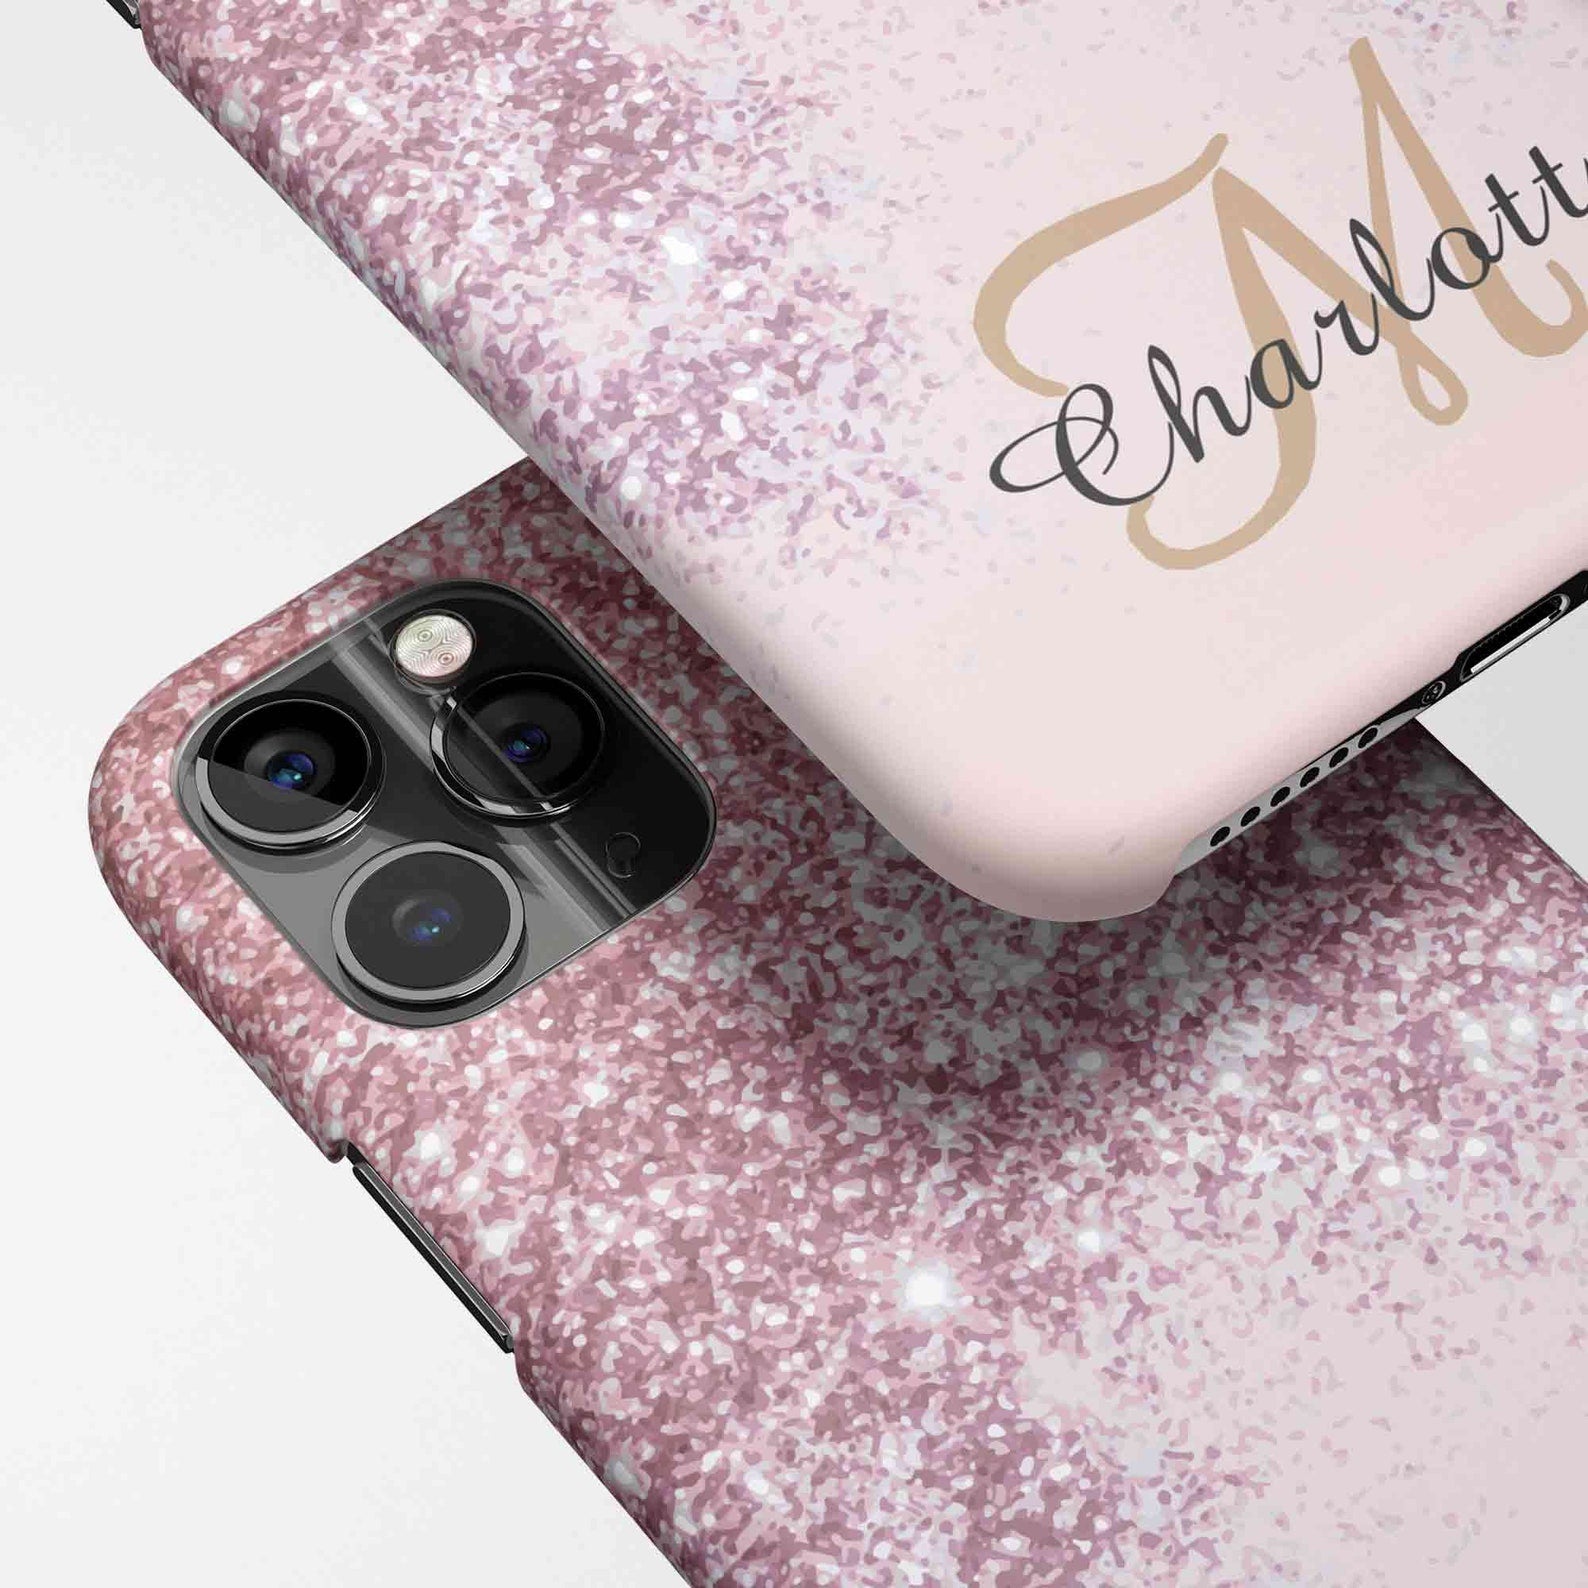 Cutest Cell Phone Cases  Pink phone cases, Glitter phone cases